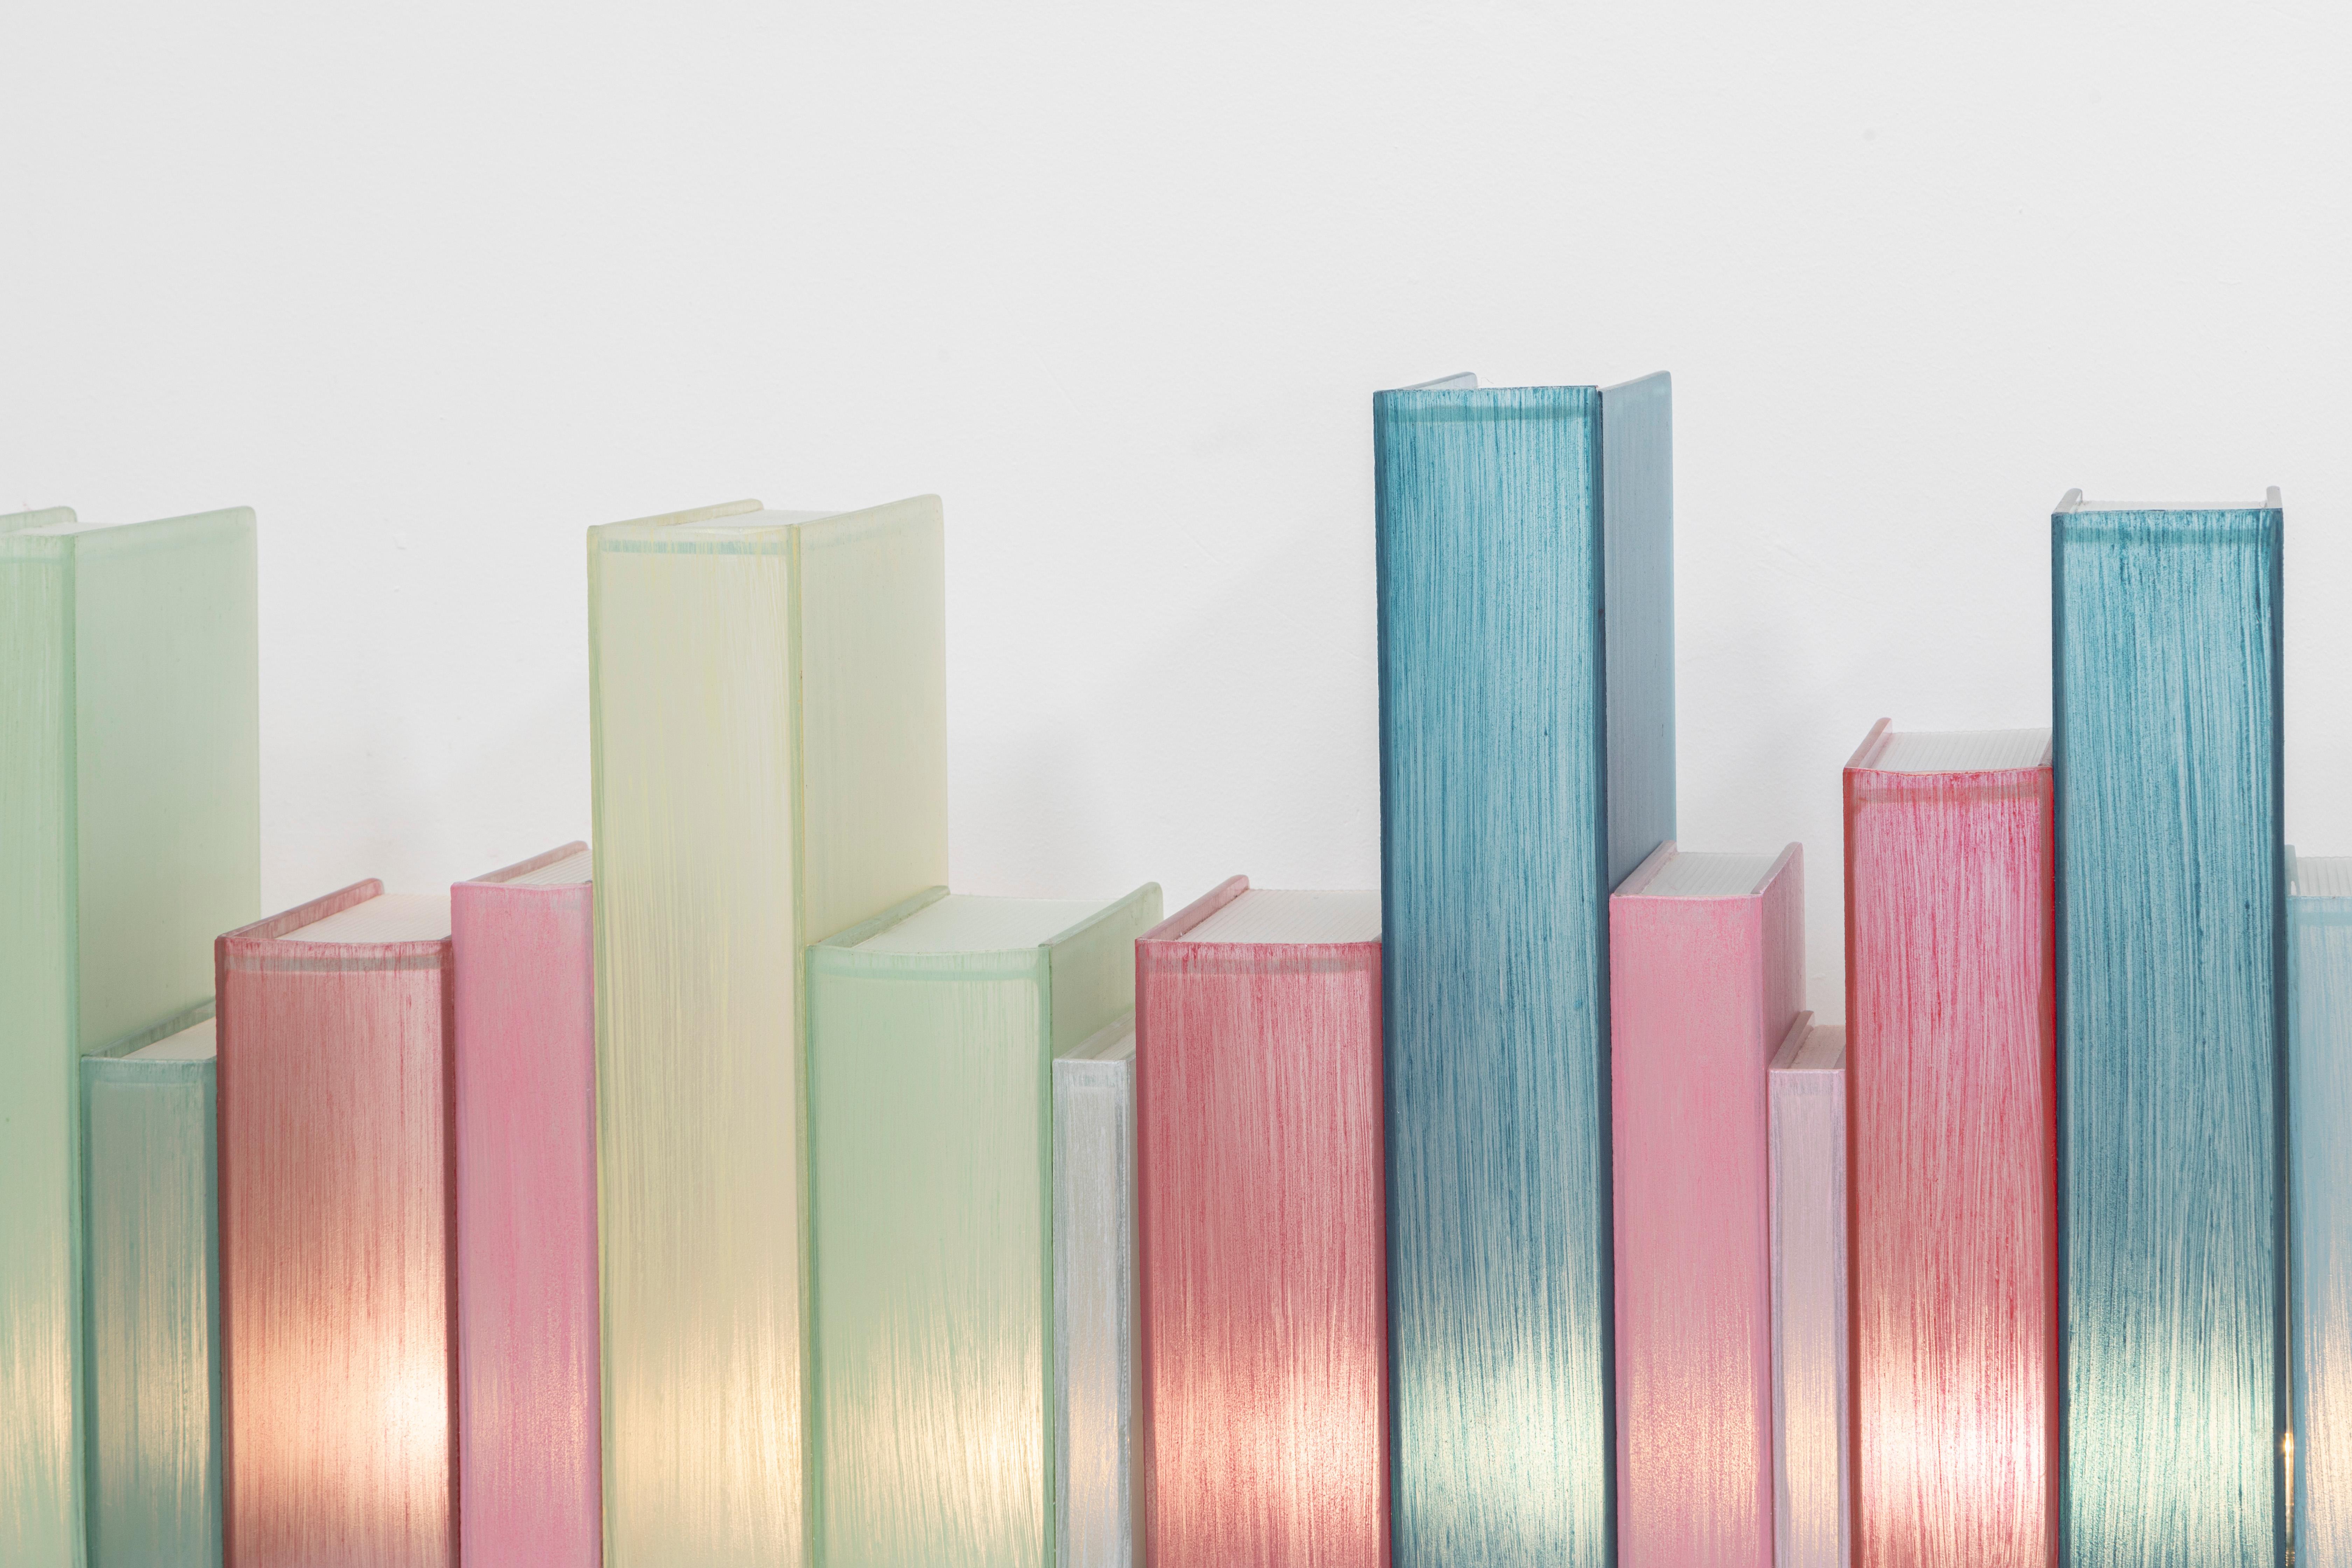 Chiara Dynys, Enlightening Books, 2021, glass, hand painted, colours, light  - Contemporary Sculpture by Chiara Dynys 